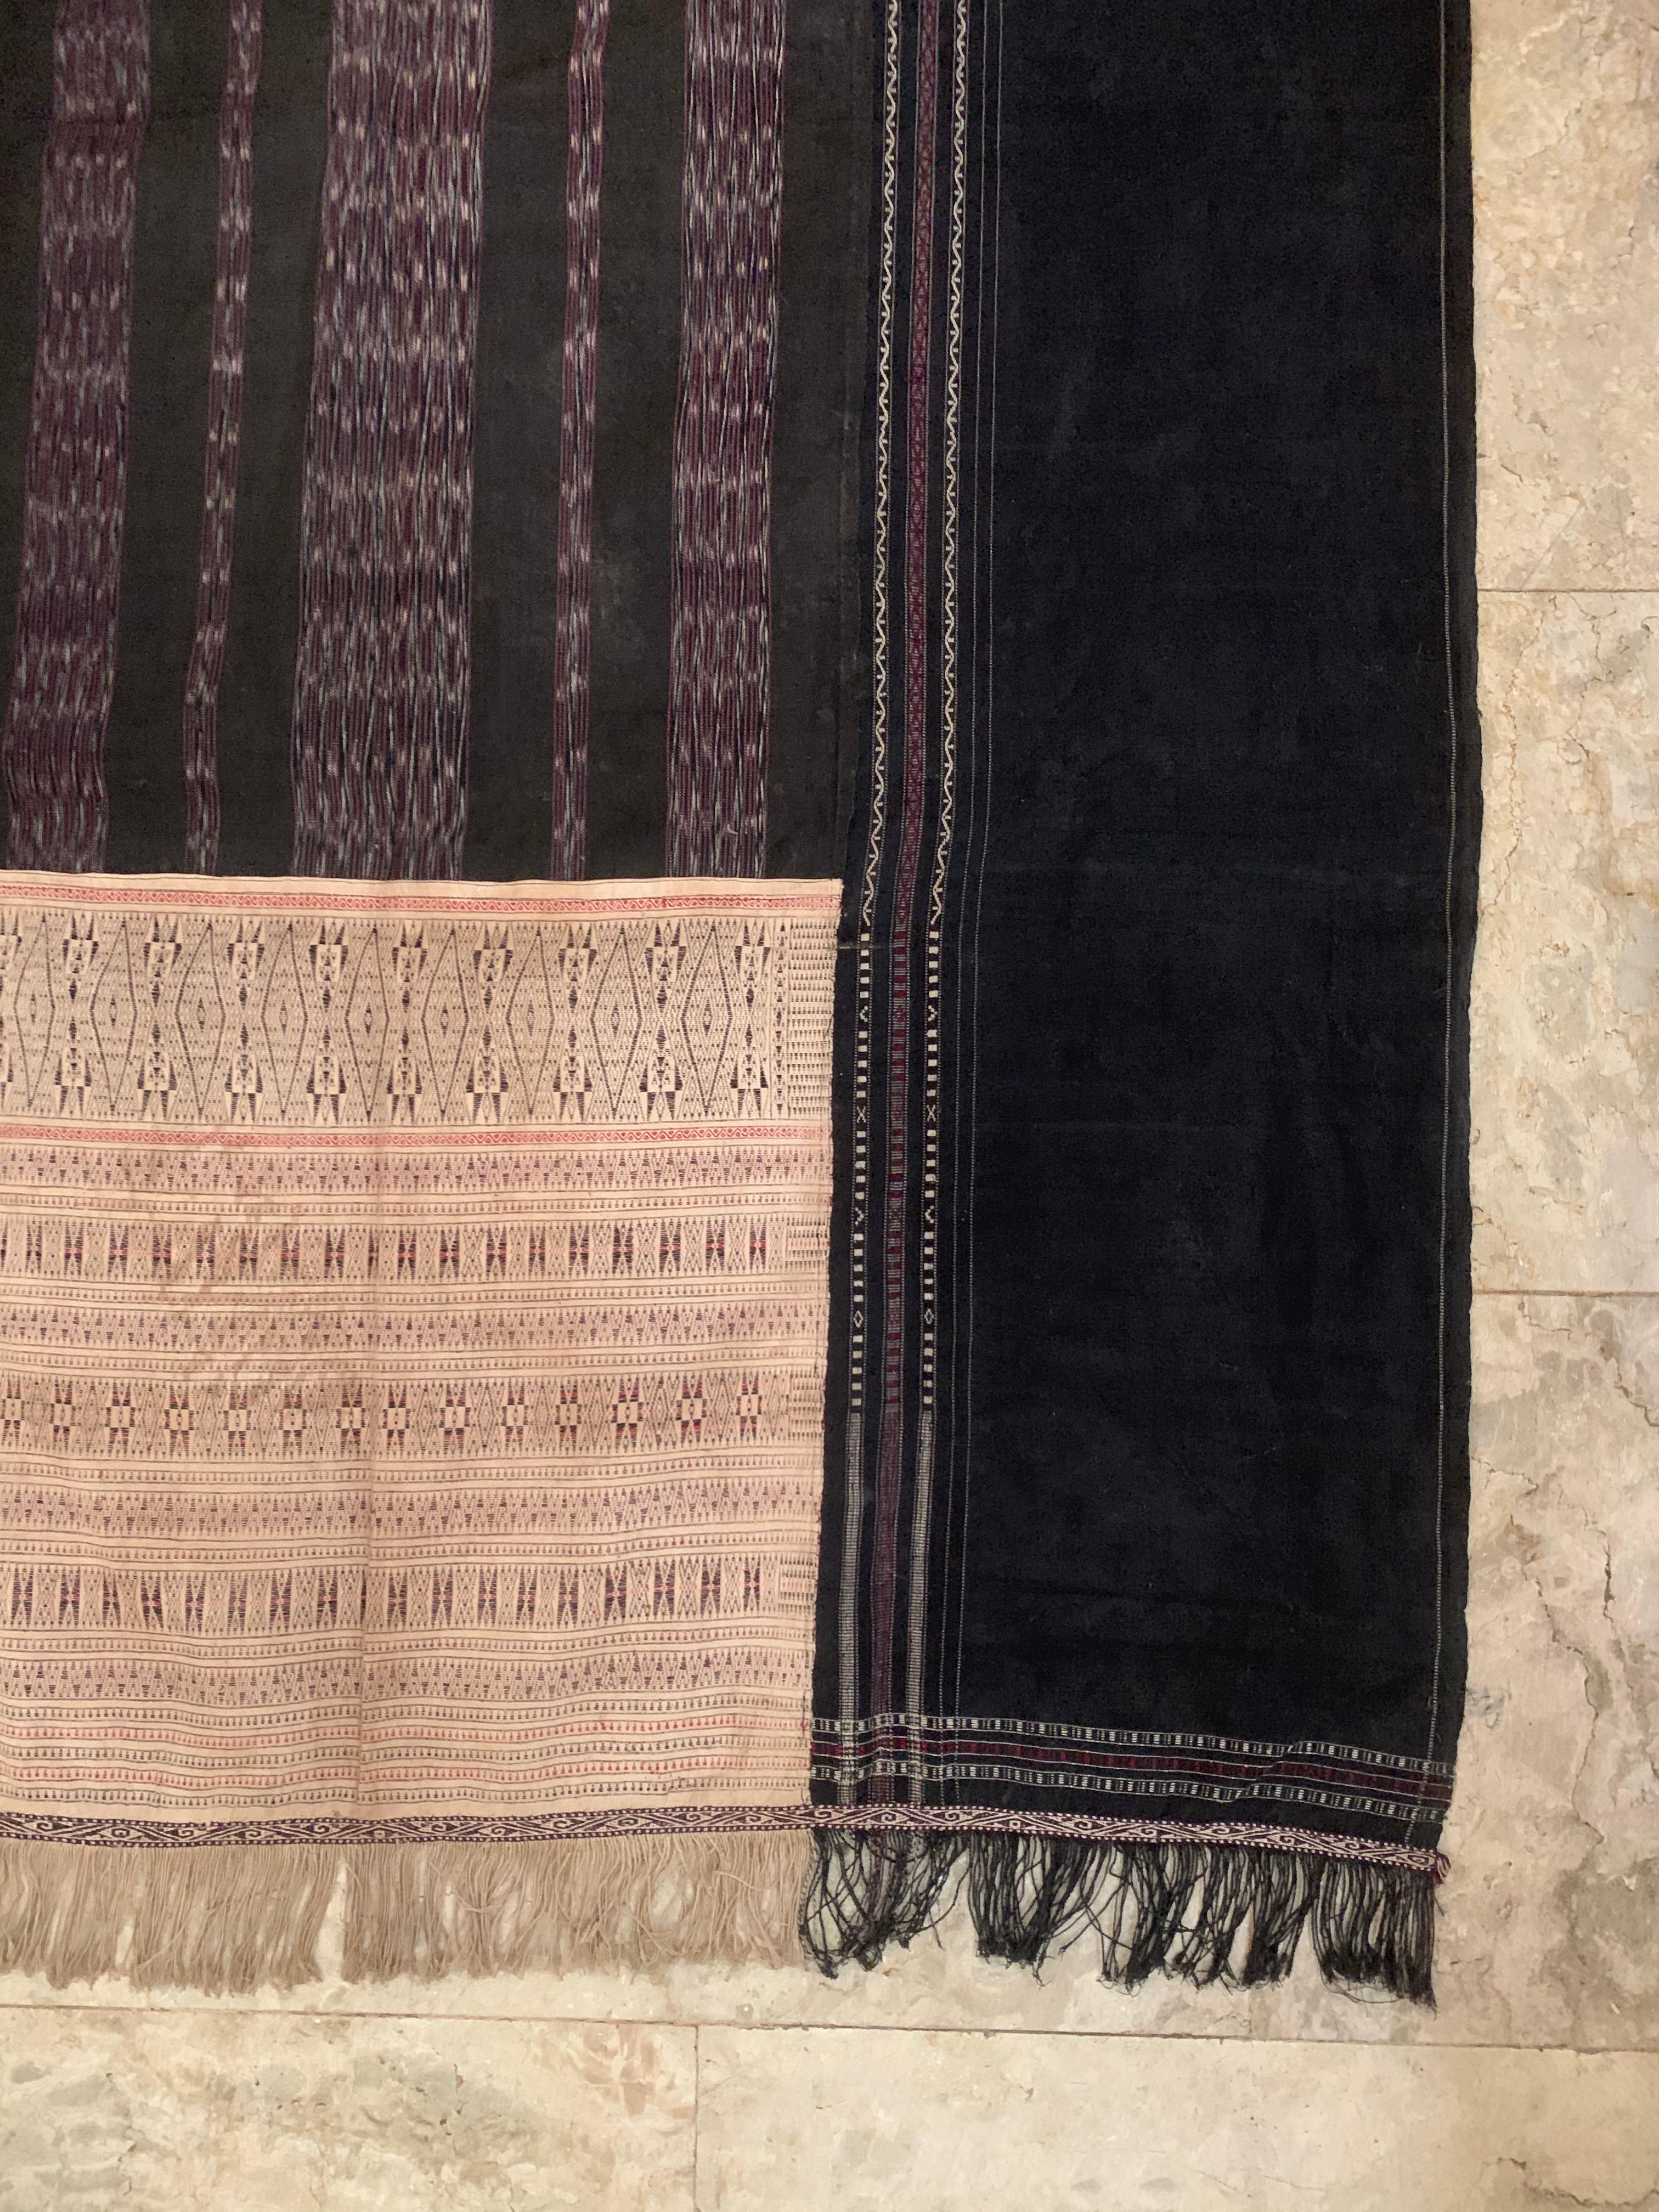 The most prized and scared textiles of the Batak Tribes People of Northern Sumatra are “ragidup”, which translates to “life pattern”. These textiles are central to both an individuals life and will even follow them to the after life. The present